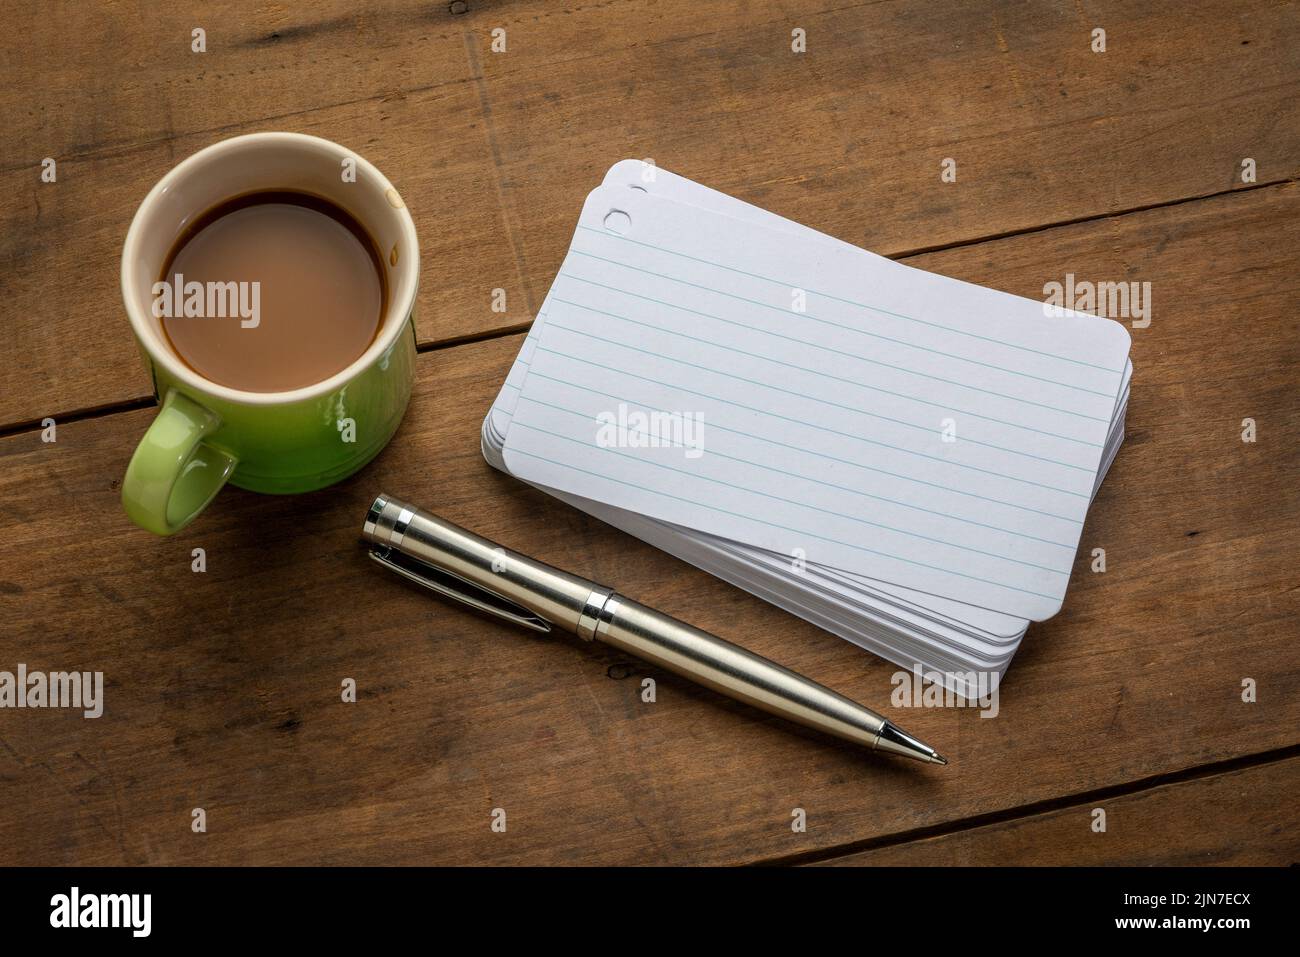 a stack of blank index cards with a cup of coffee and  a pen against textured bark paper Stock Photo